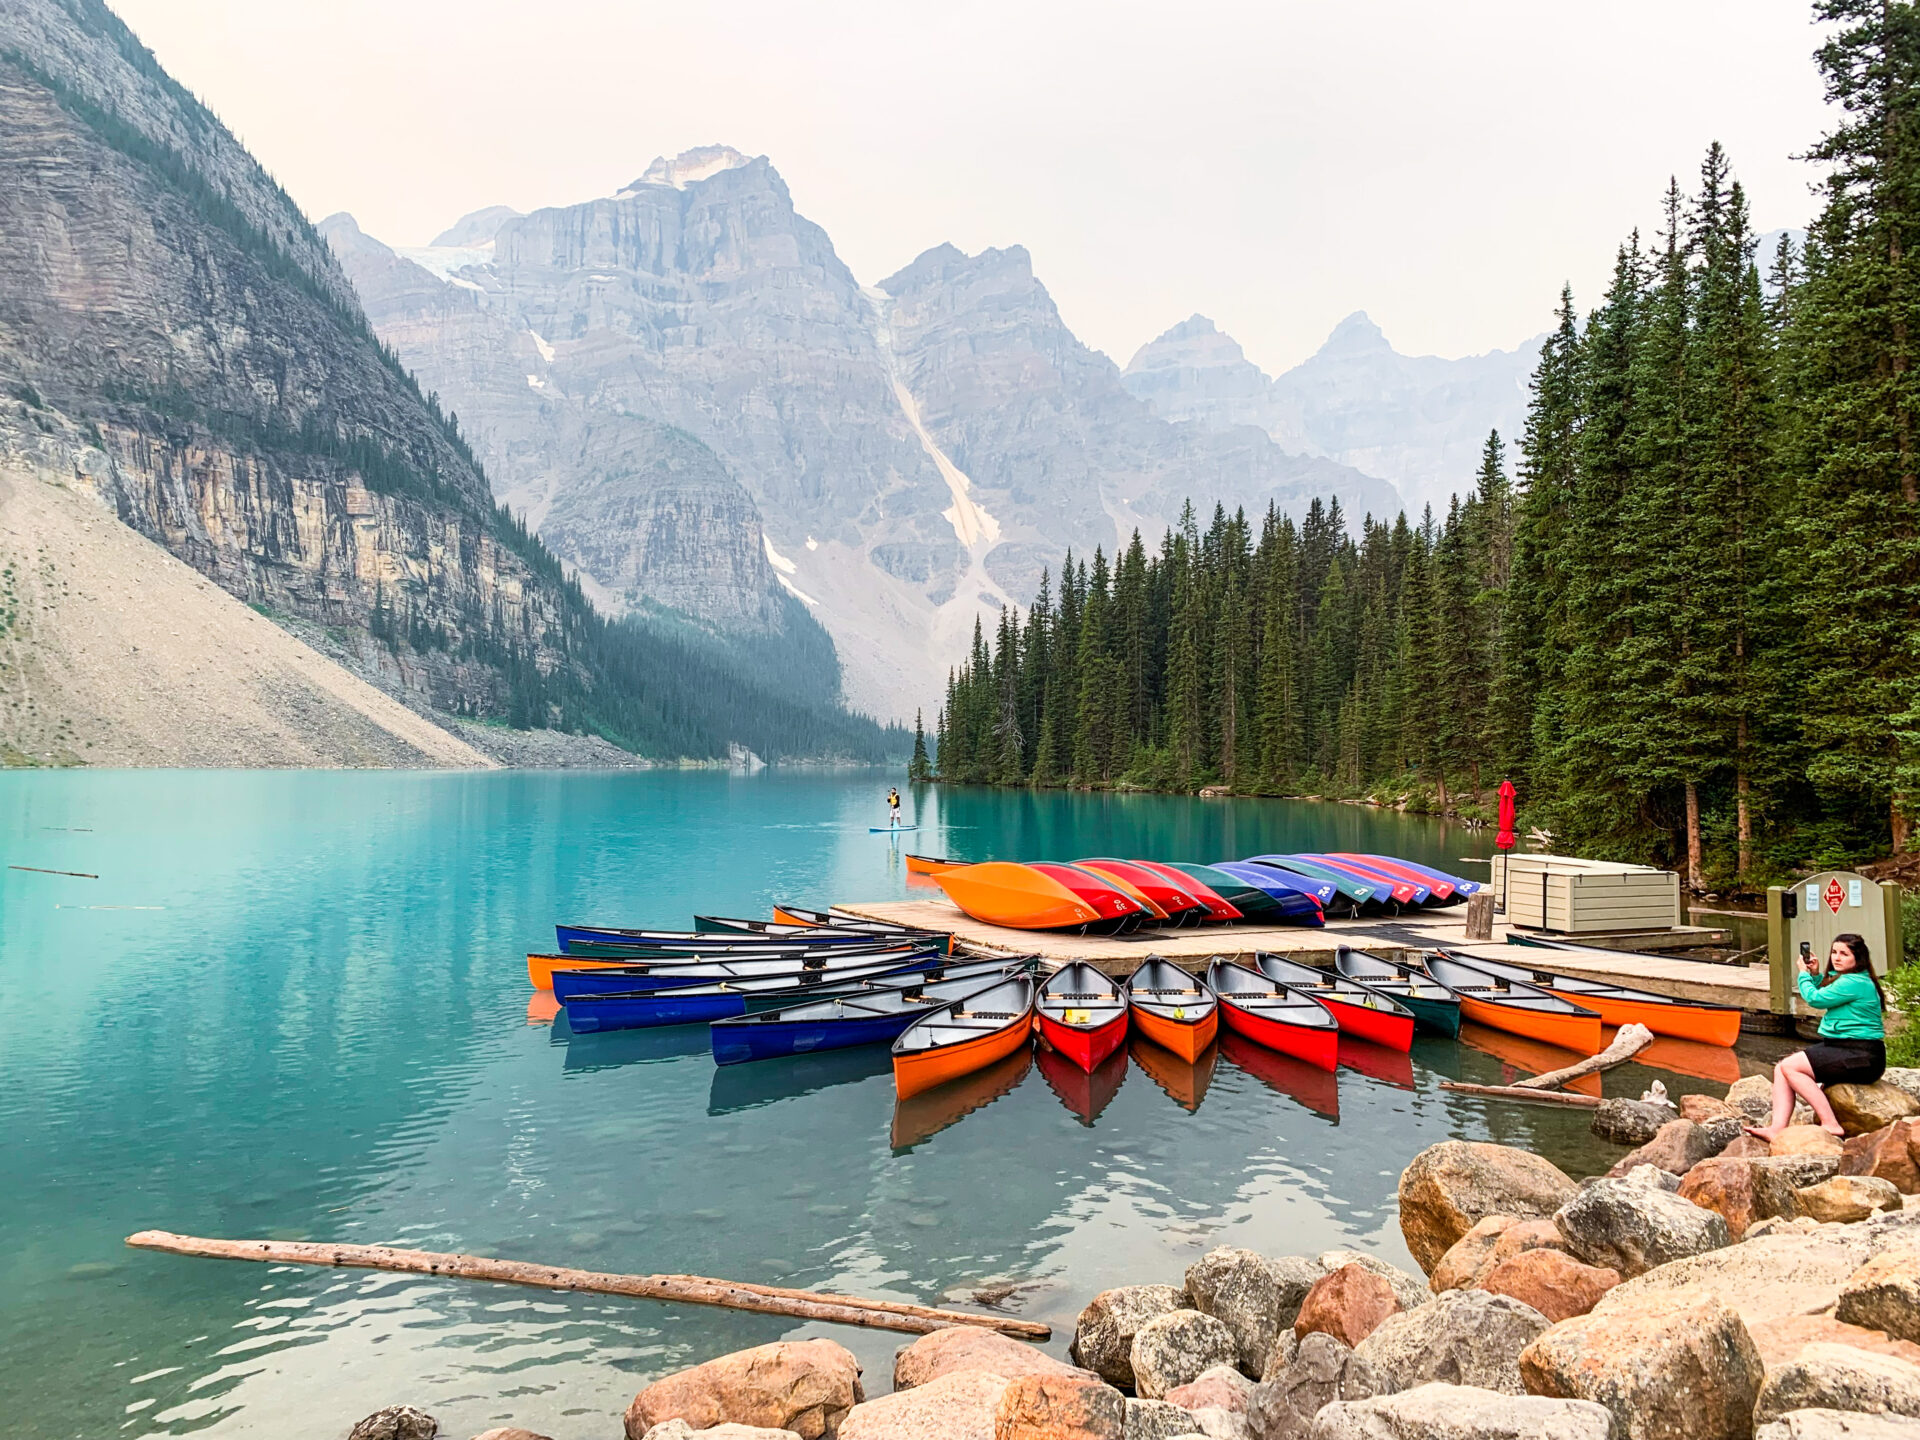 How to get to Moraine Lake in Banff National Park